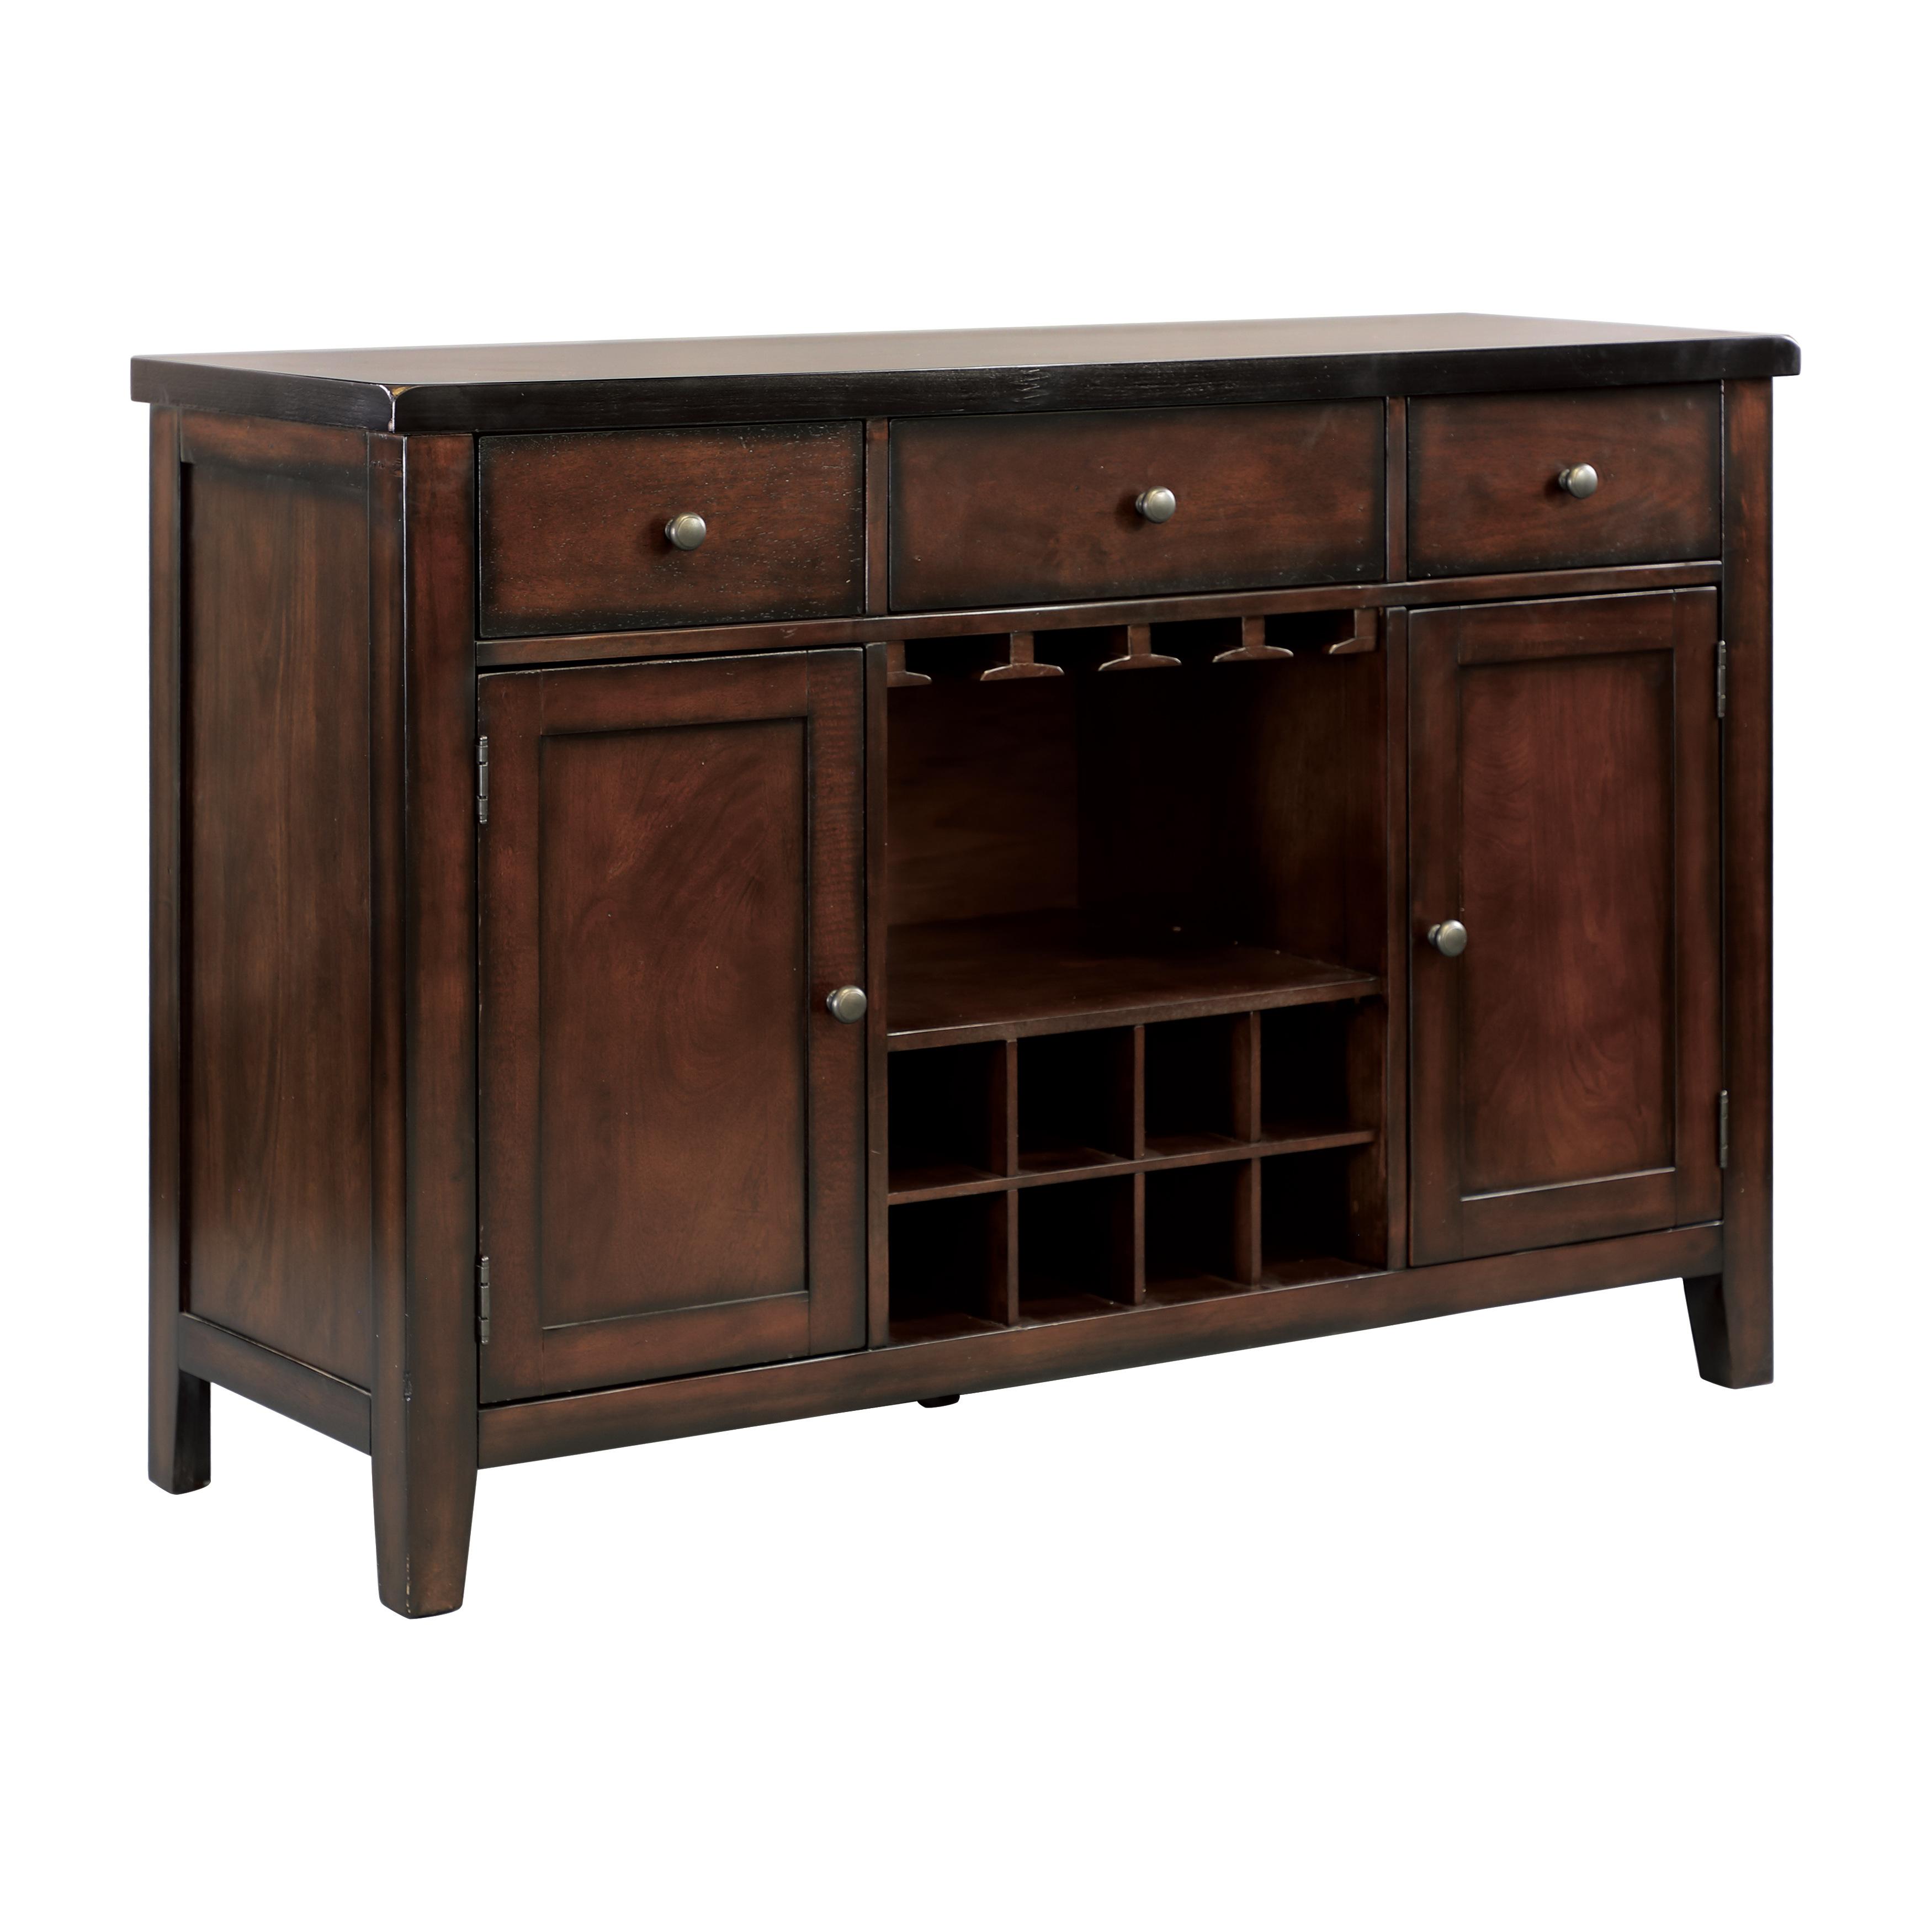 

    
Transitional Cherry Wood Server Homelegance Mantello Collection 5547-40-S
